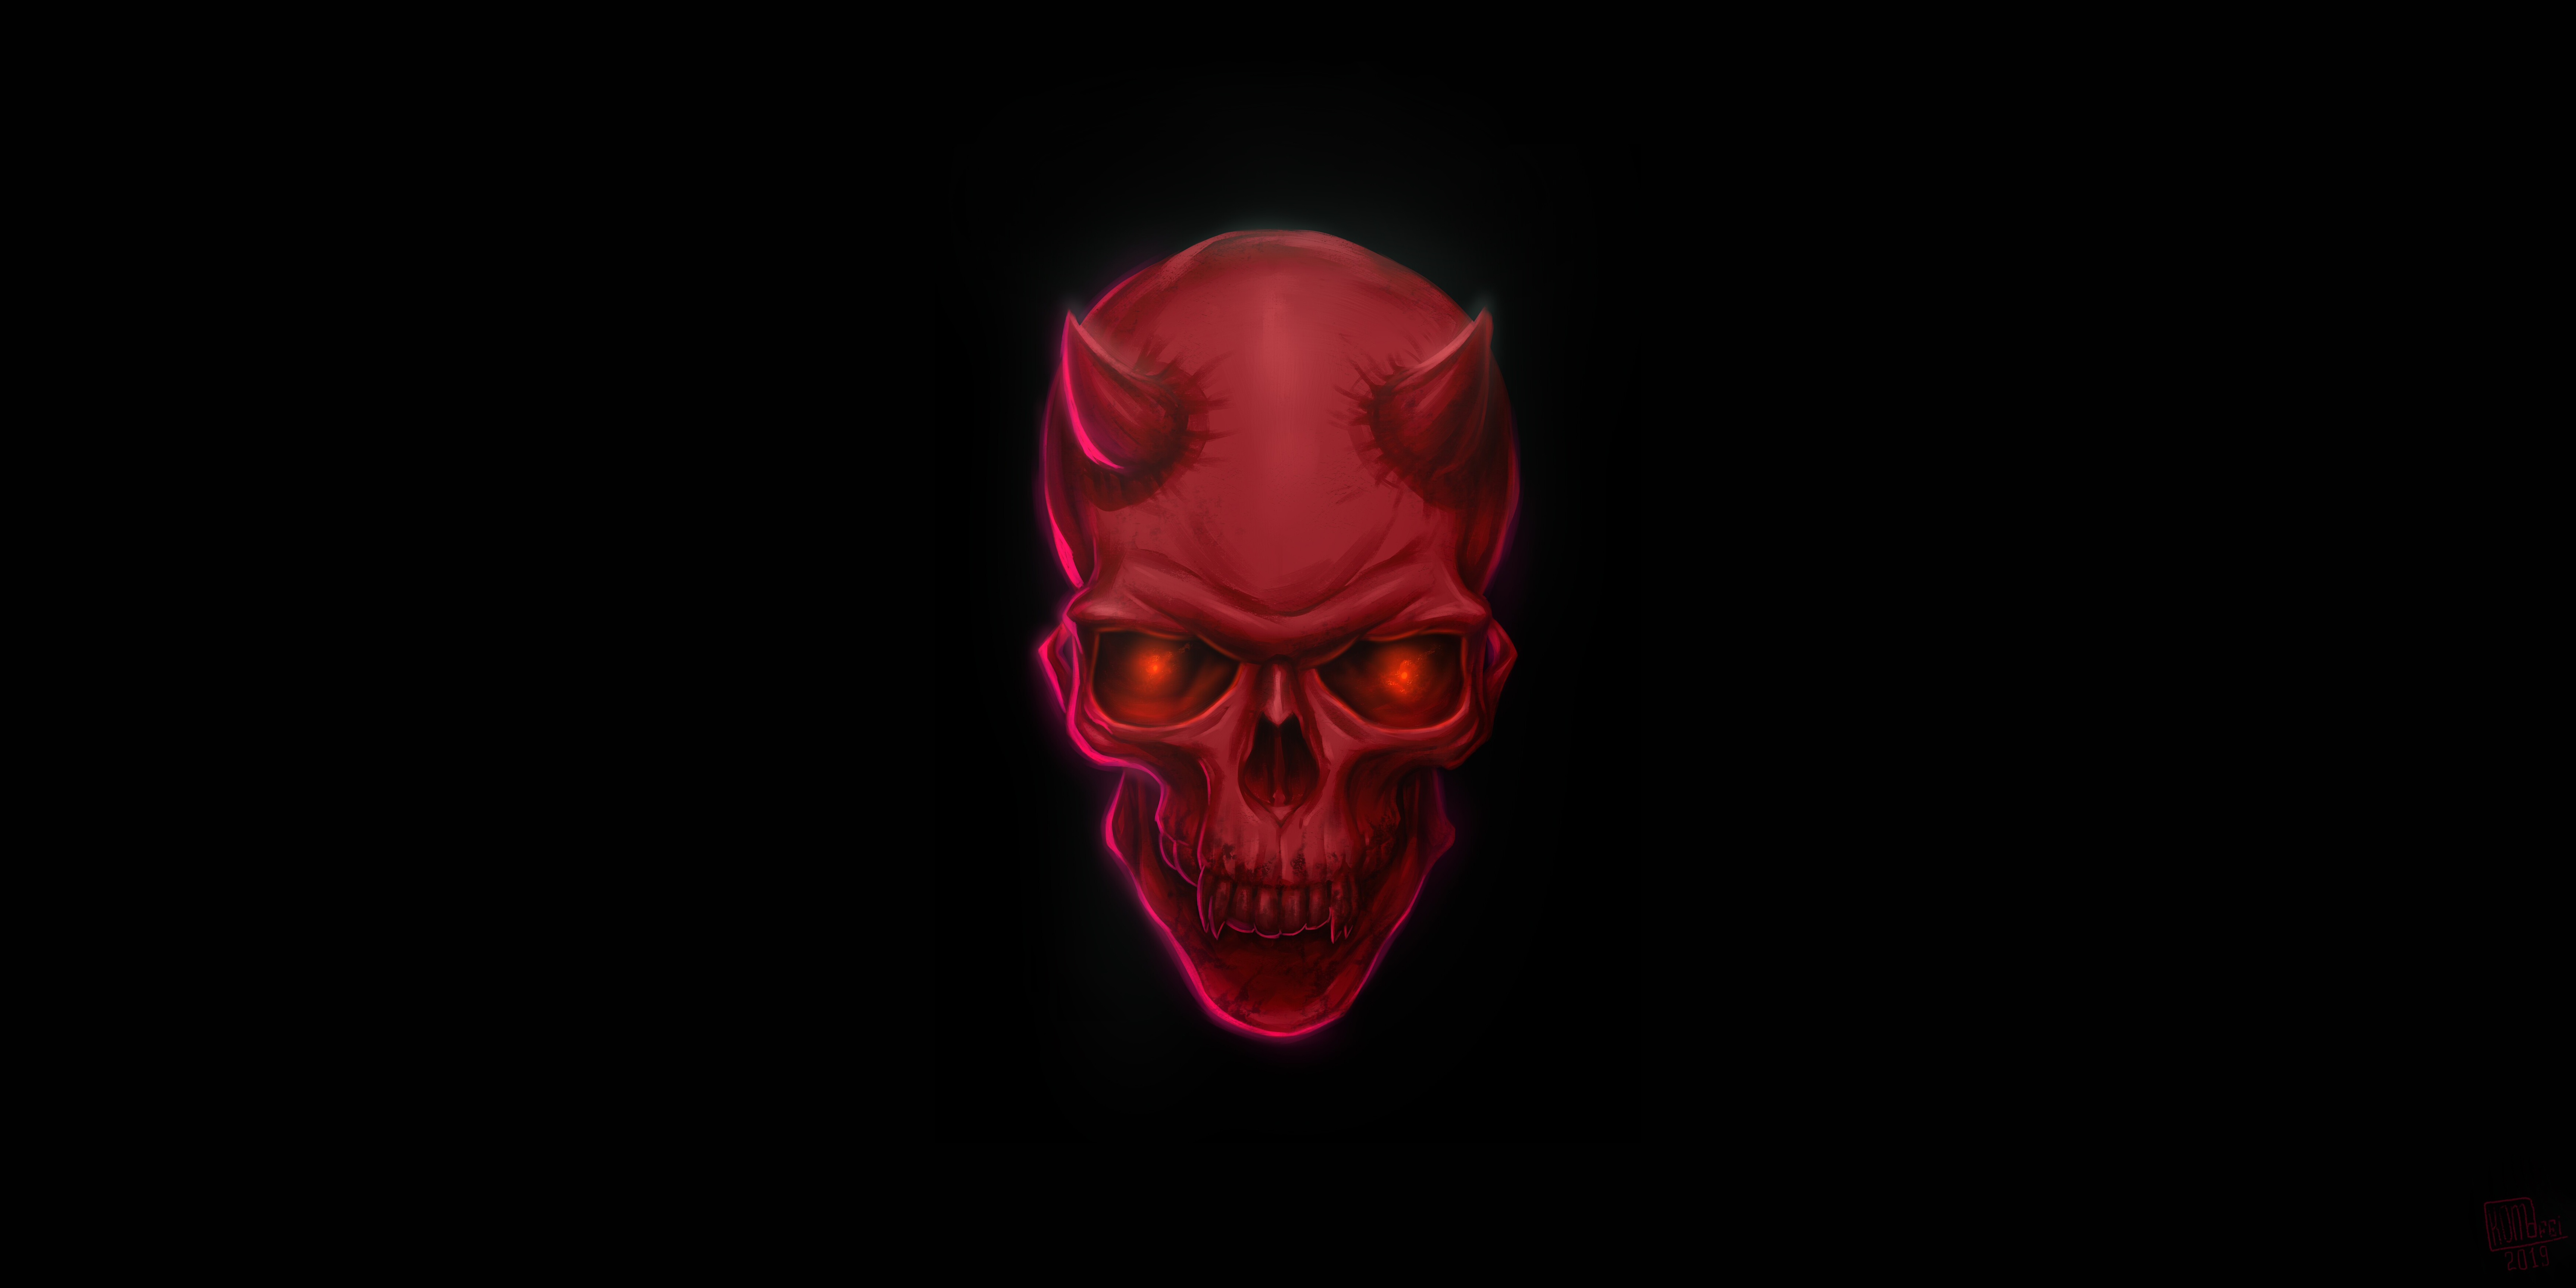 Red devil skull k hd artist k wallpapers images backgrounds photos and pictures